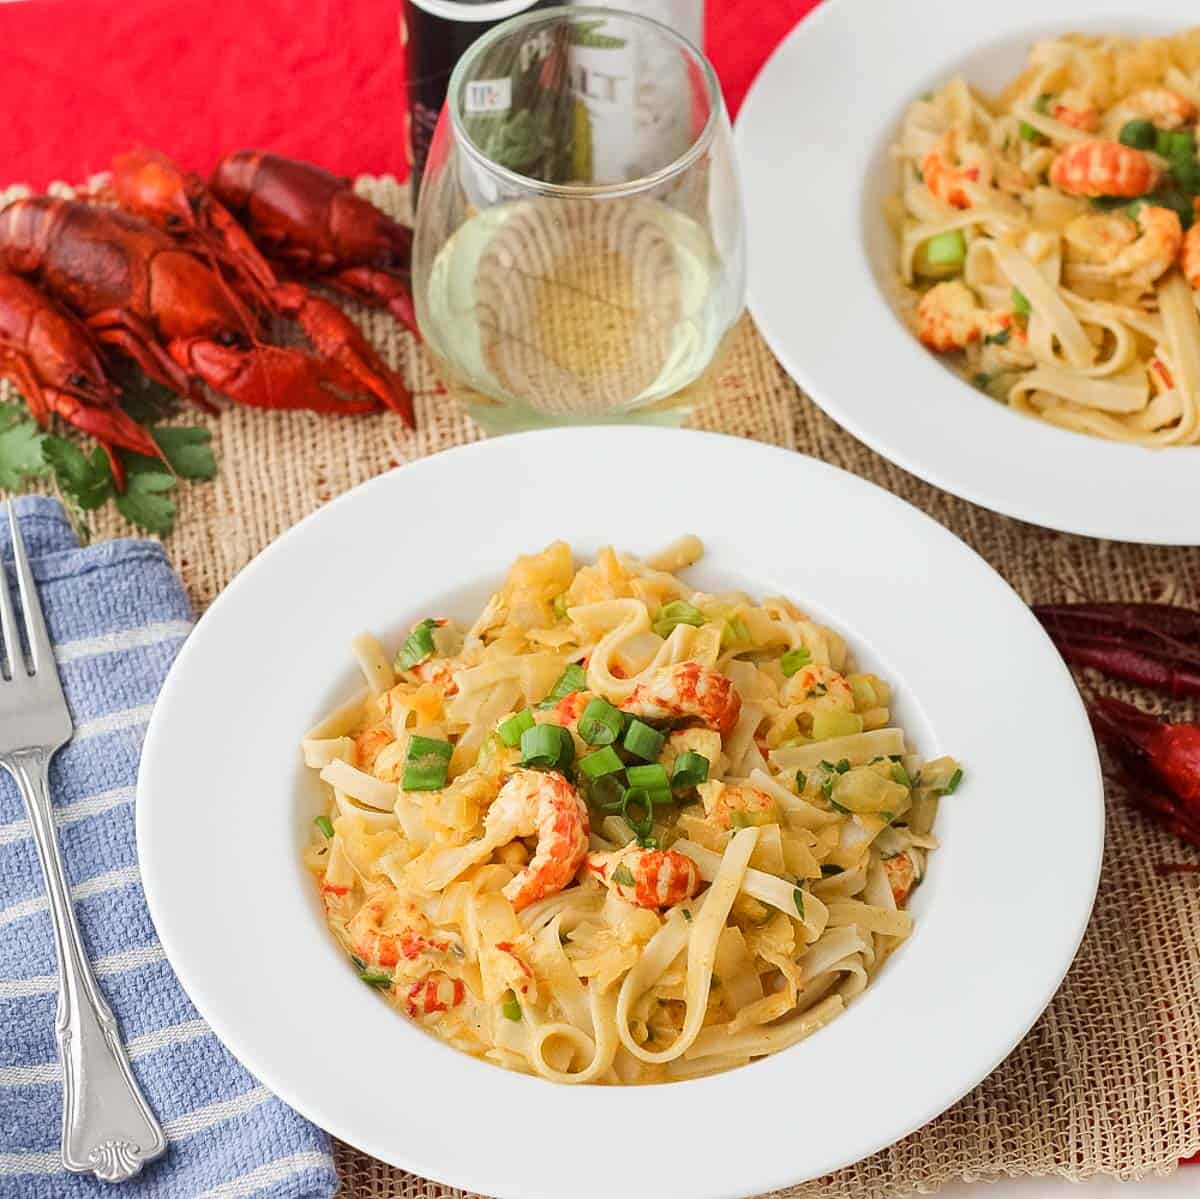 flat white bowls filled with fettuccine topped with crawfish Monica sauce, next to a blue napkin and fork, surrounded by a glass of white wine plus fresh boiled crawfish.